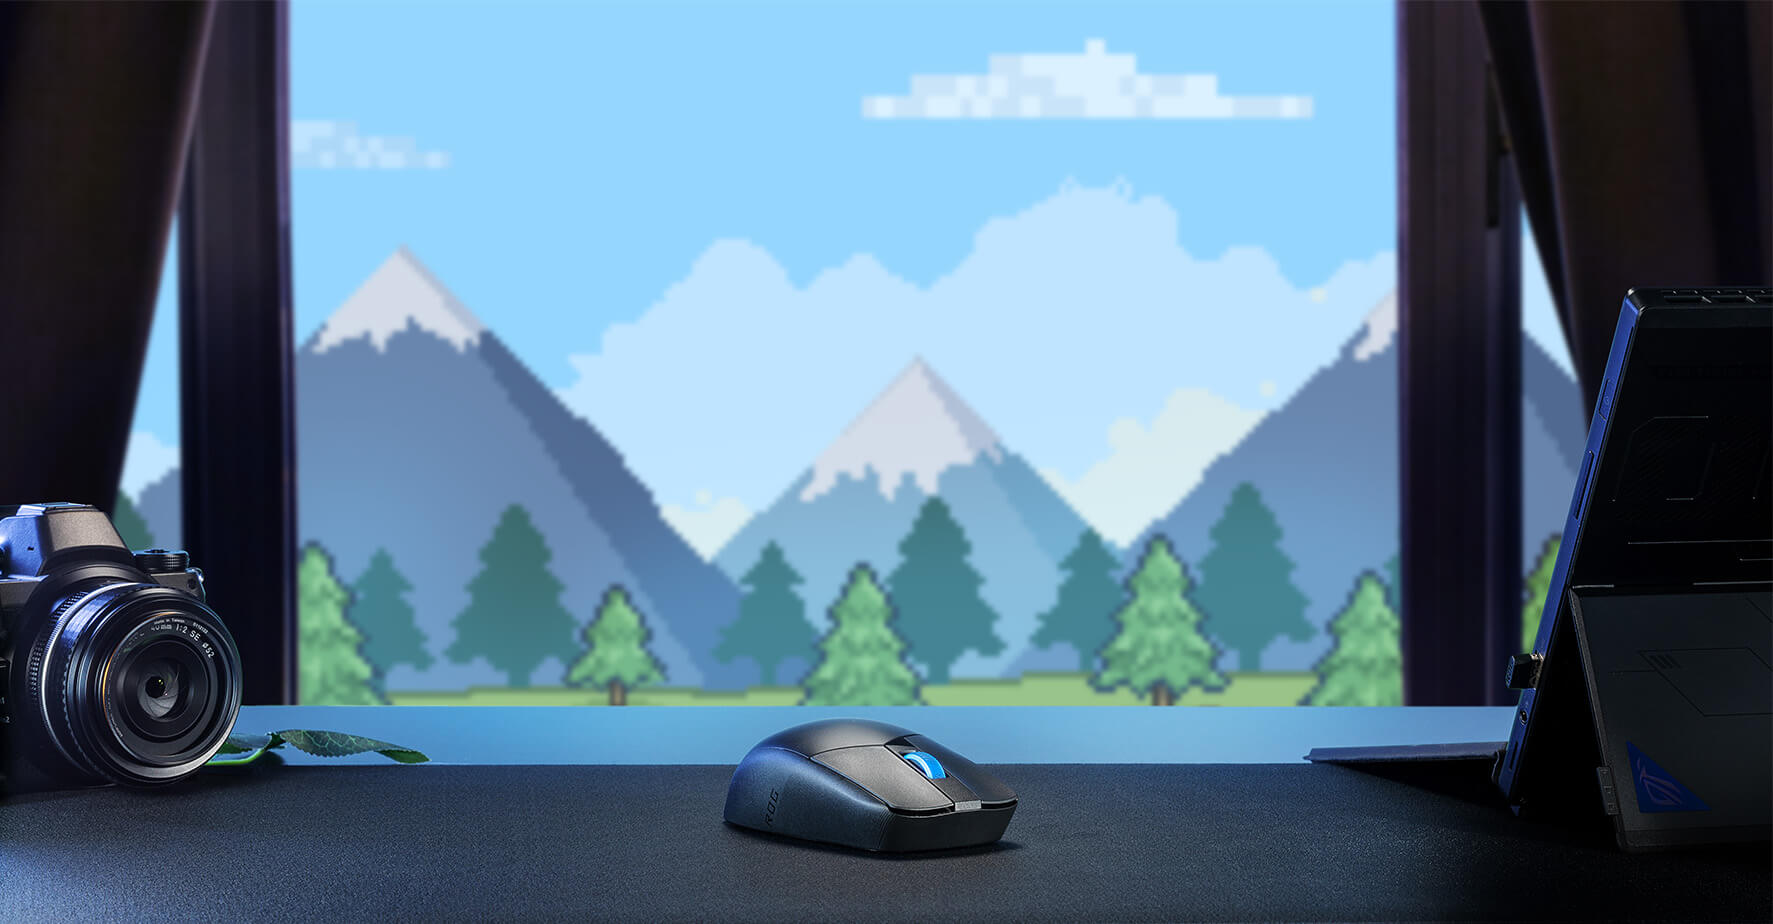 The ROG Strix Impact III Wireless on a table before a blue mountainous background 